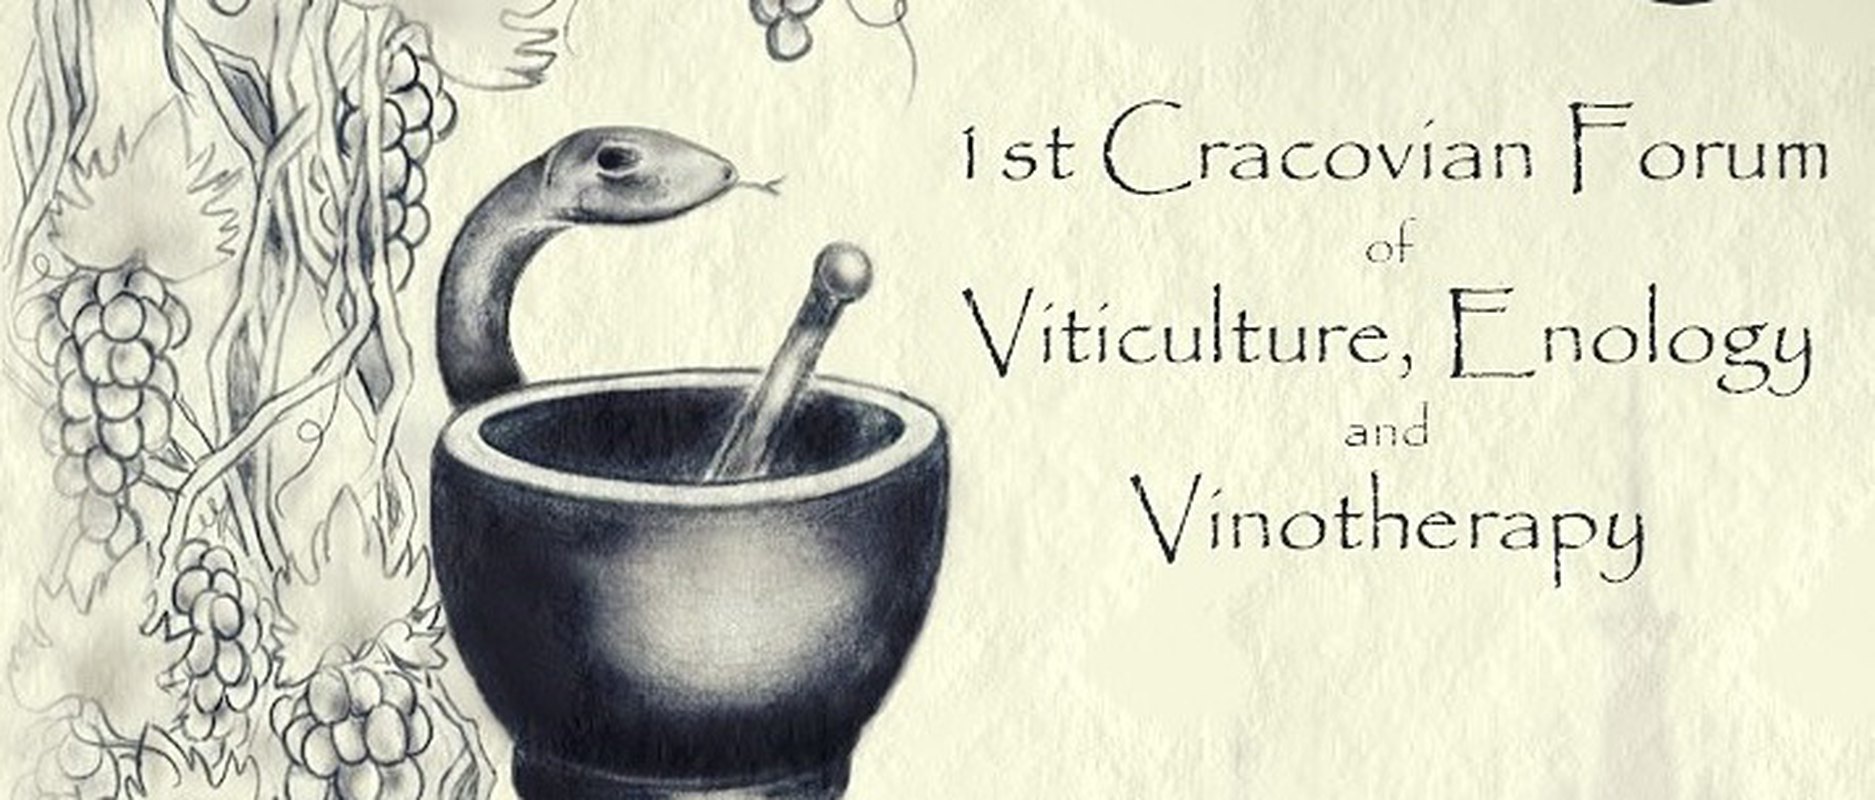 1st Cracovian Forum of Viticulture, Enology and Vinotherapy VITI-ENO-PHARM 2020